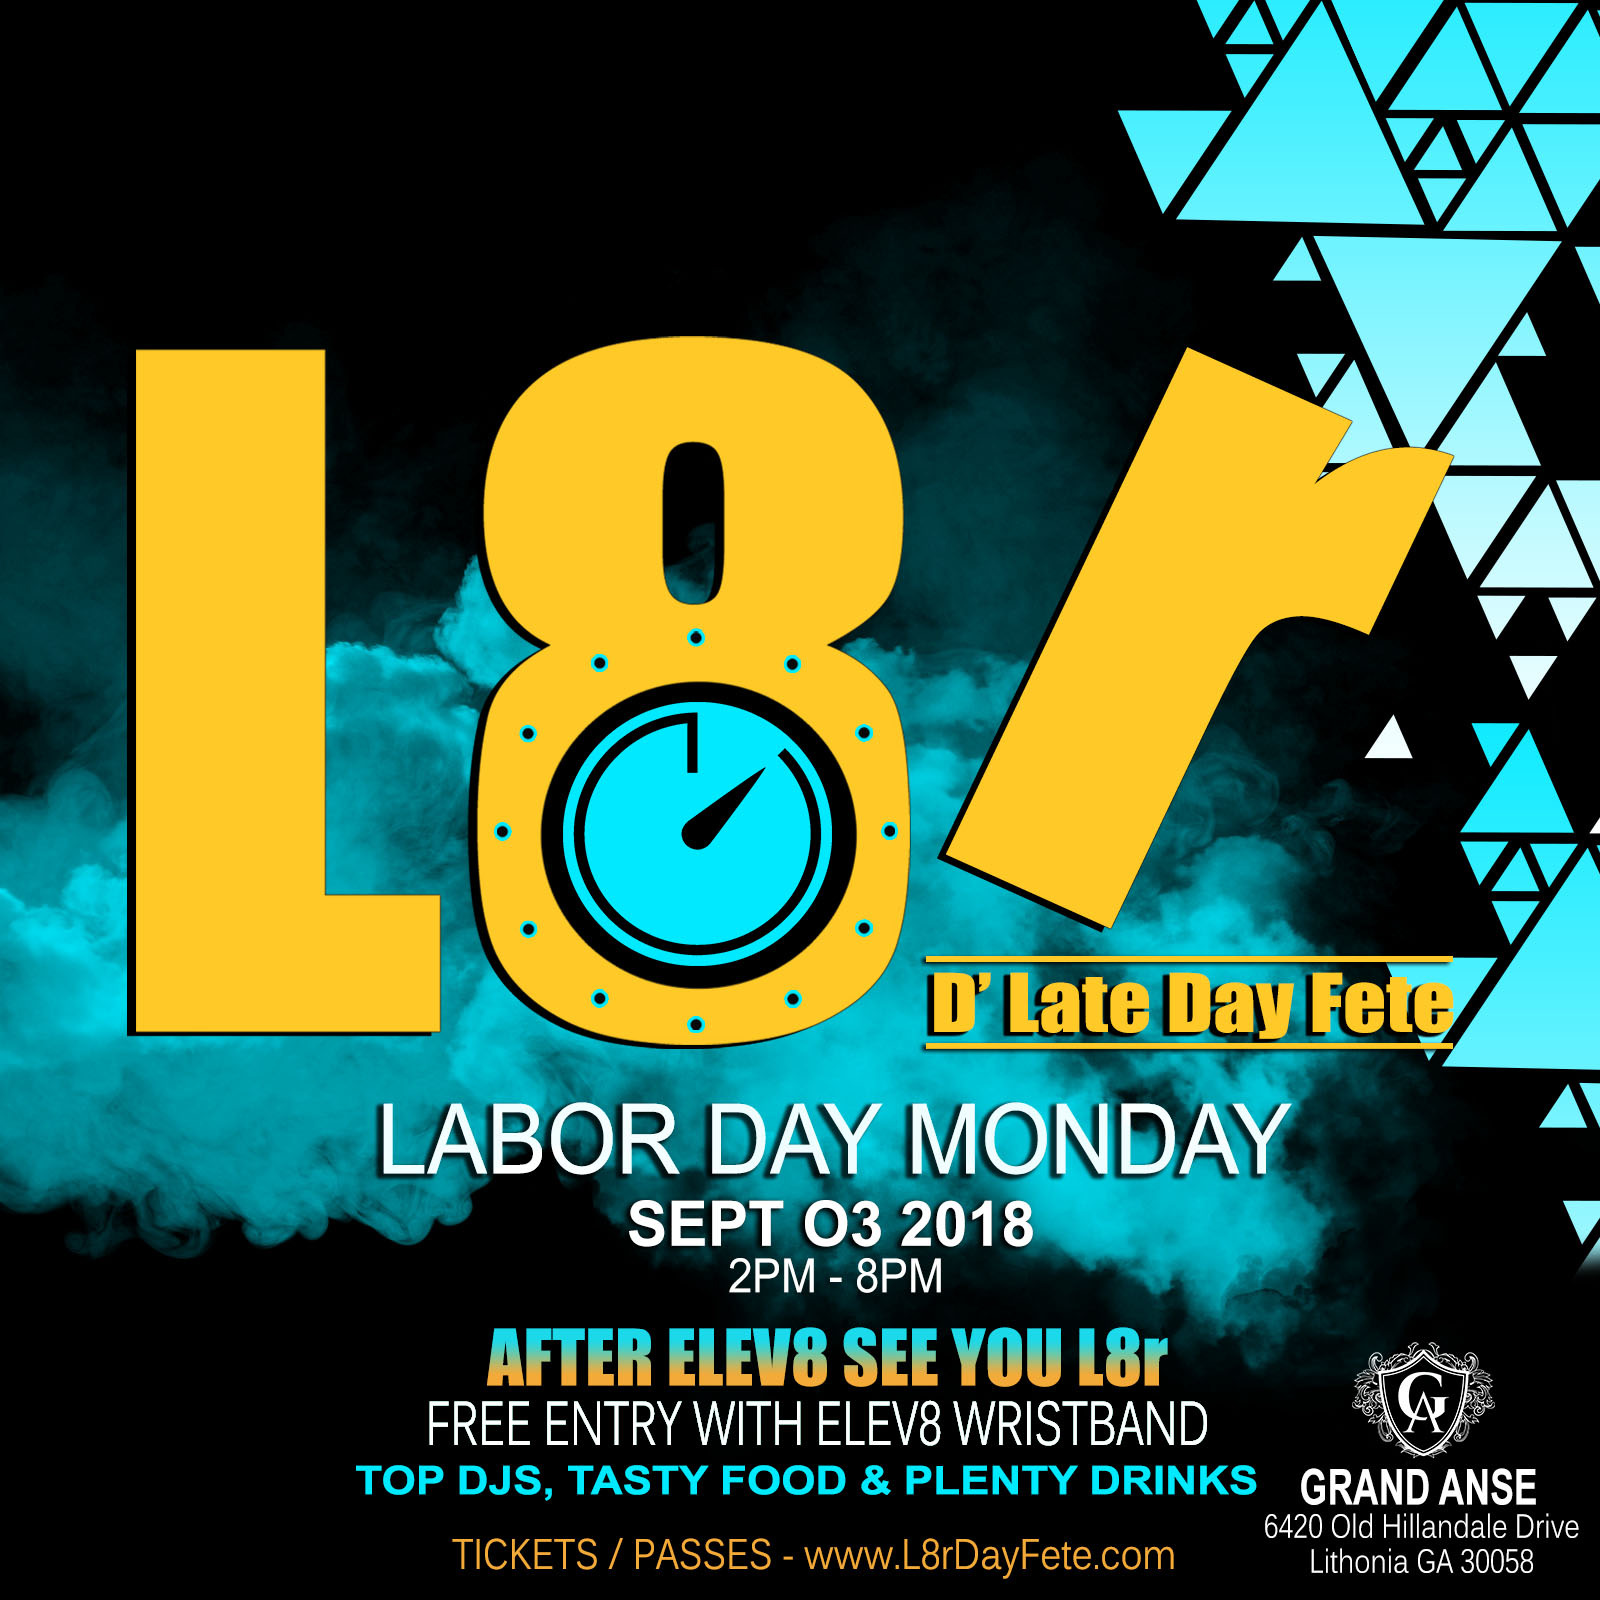 L8R (The late day fete, labor day Monday)